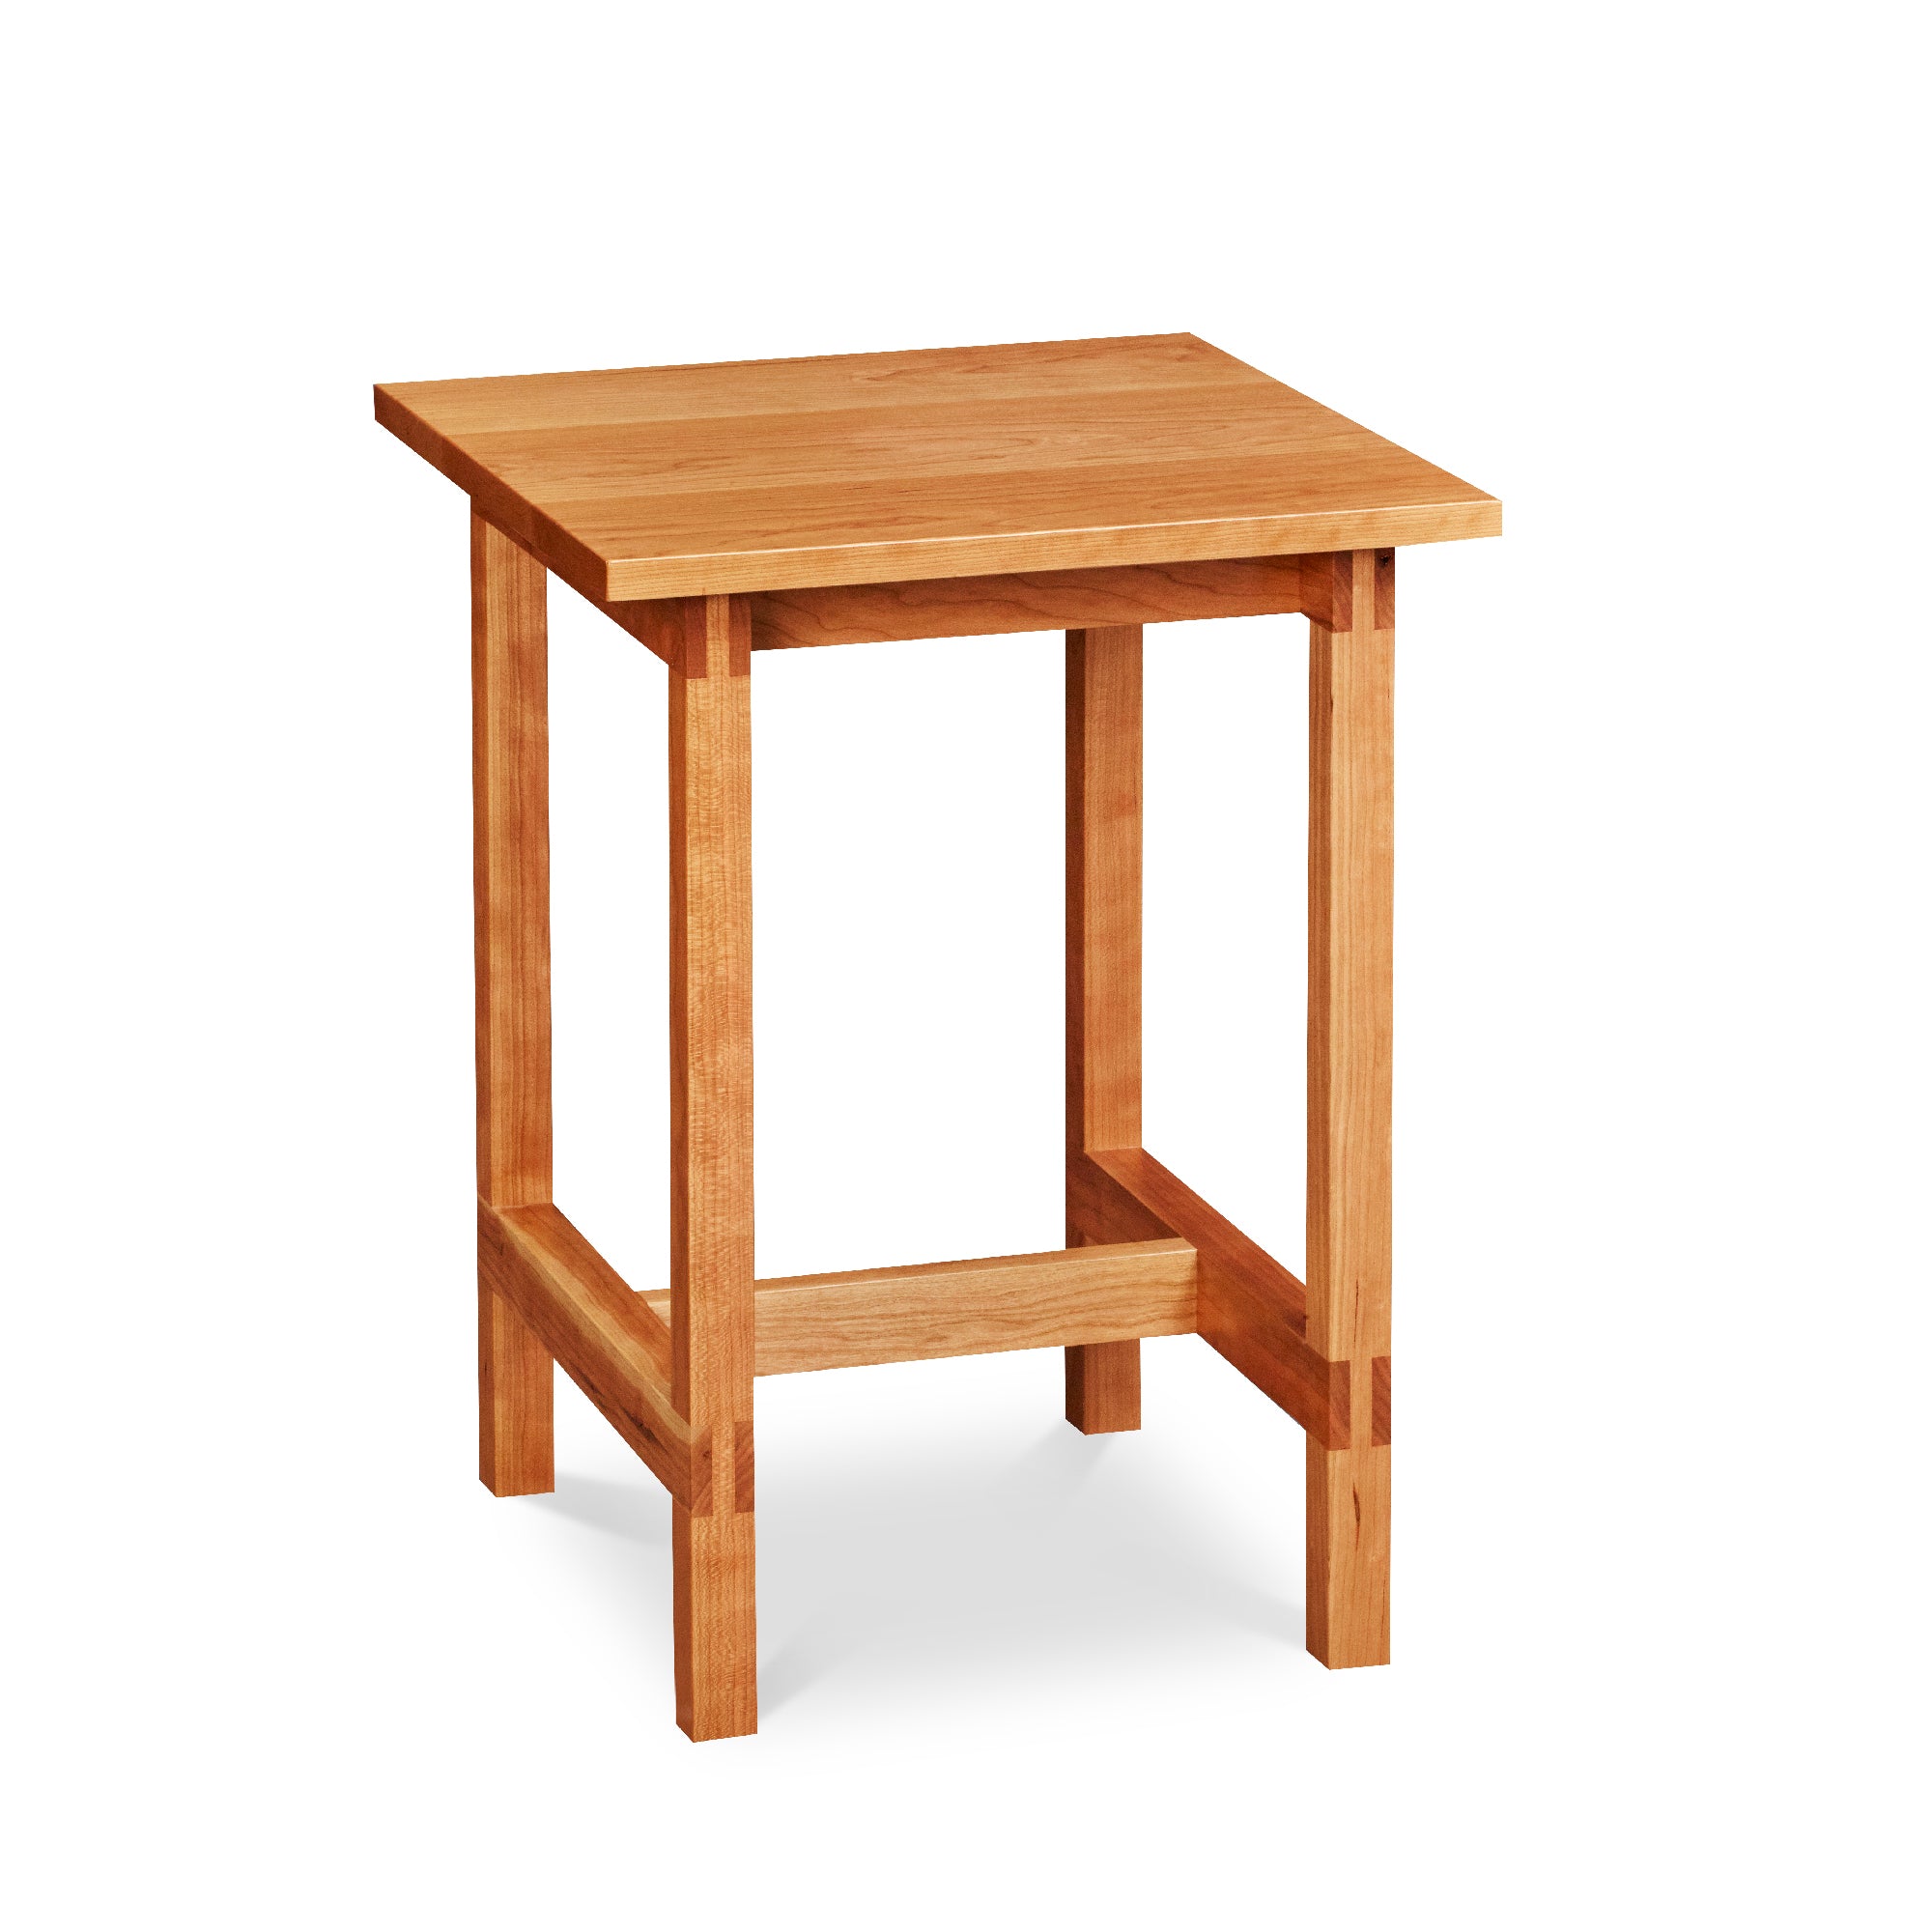 Modern trestle-style side table with visible joinery in cherry, from Maine's Chilton Furniture Co.